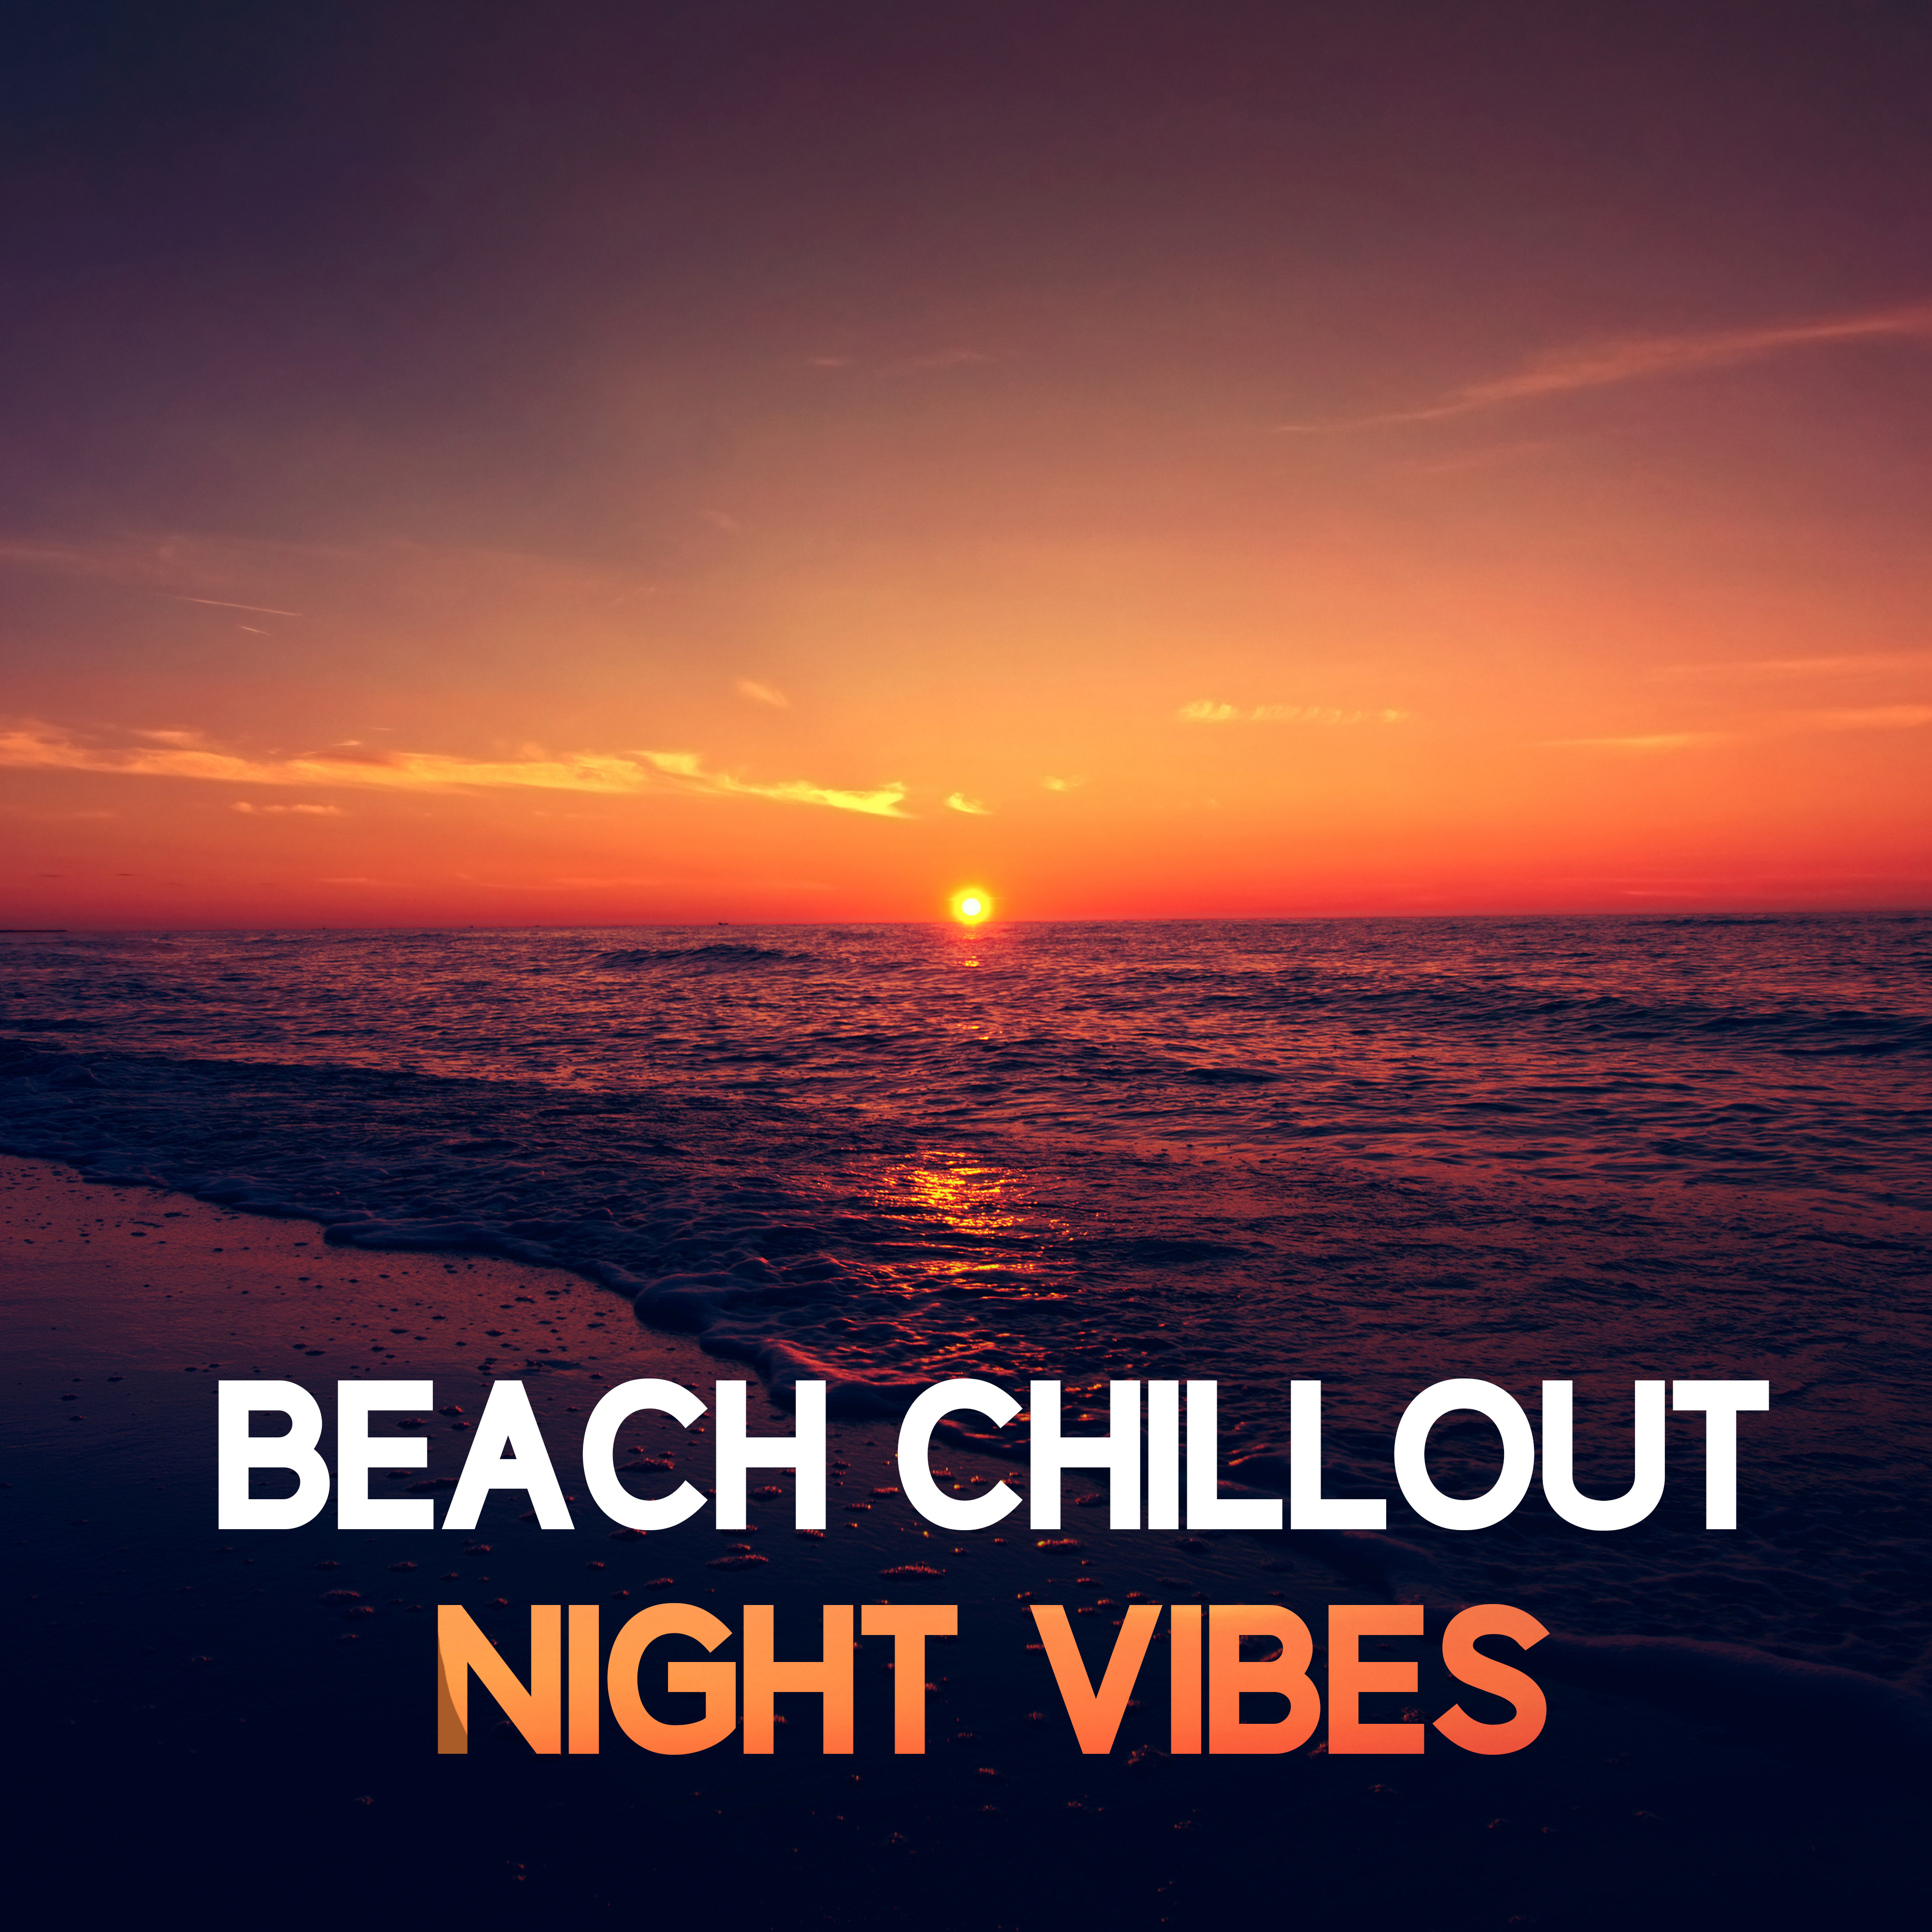 Beach Chillout Night Vibes